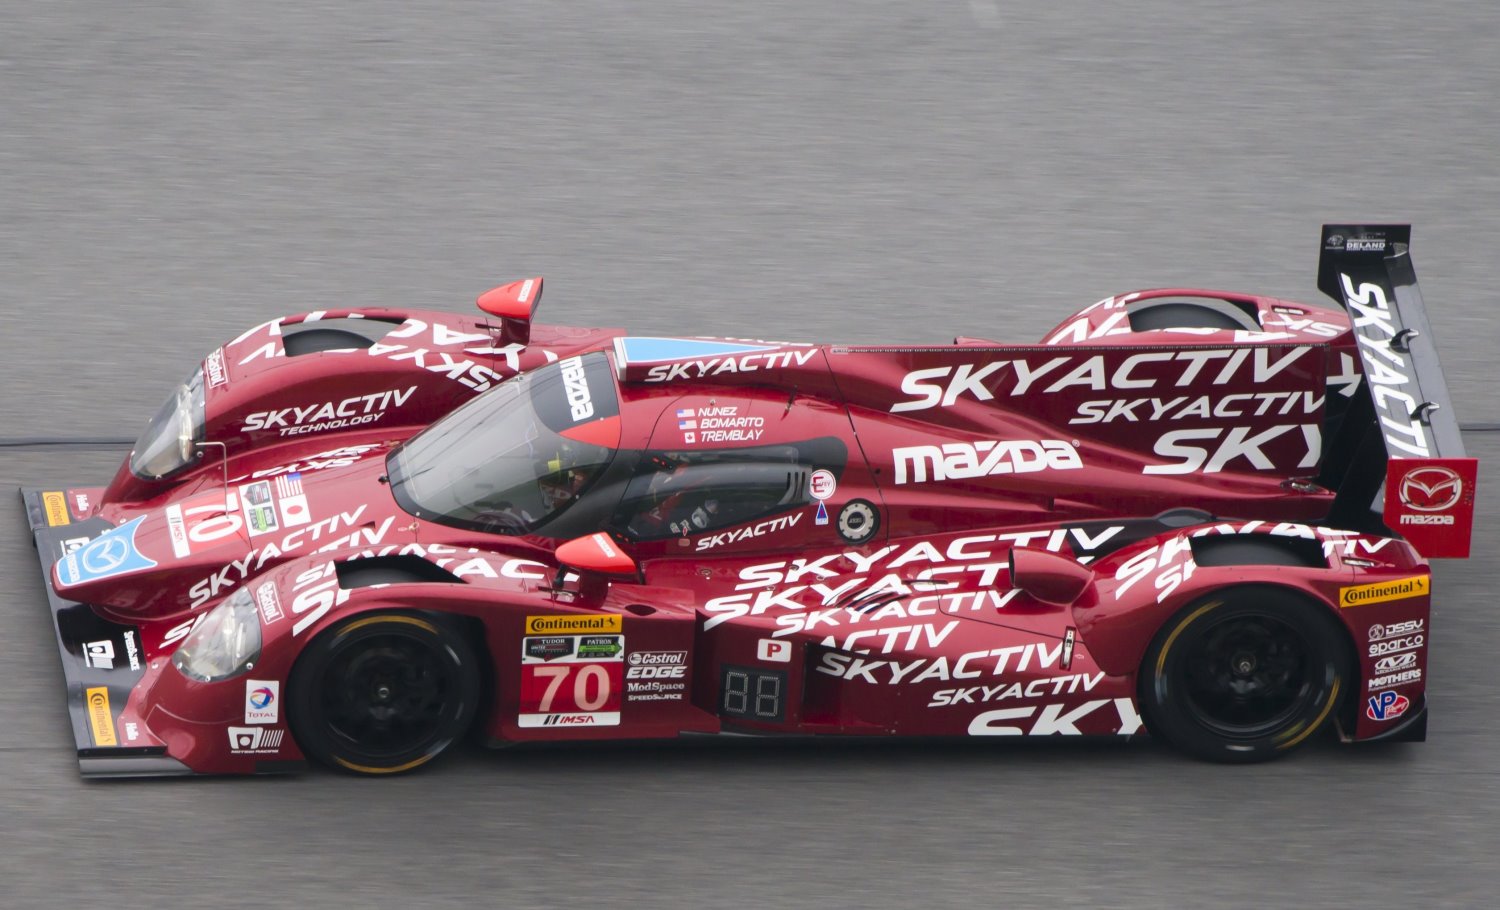 Mazda returns with the same driver lineup